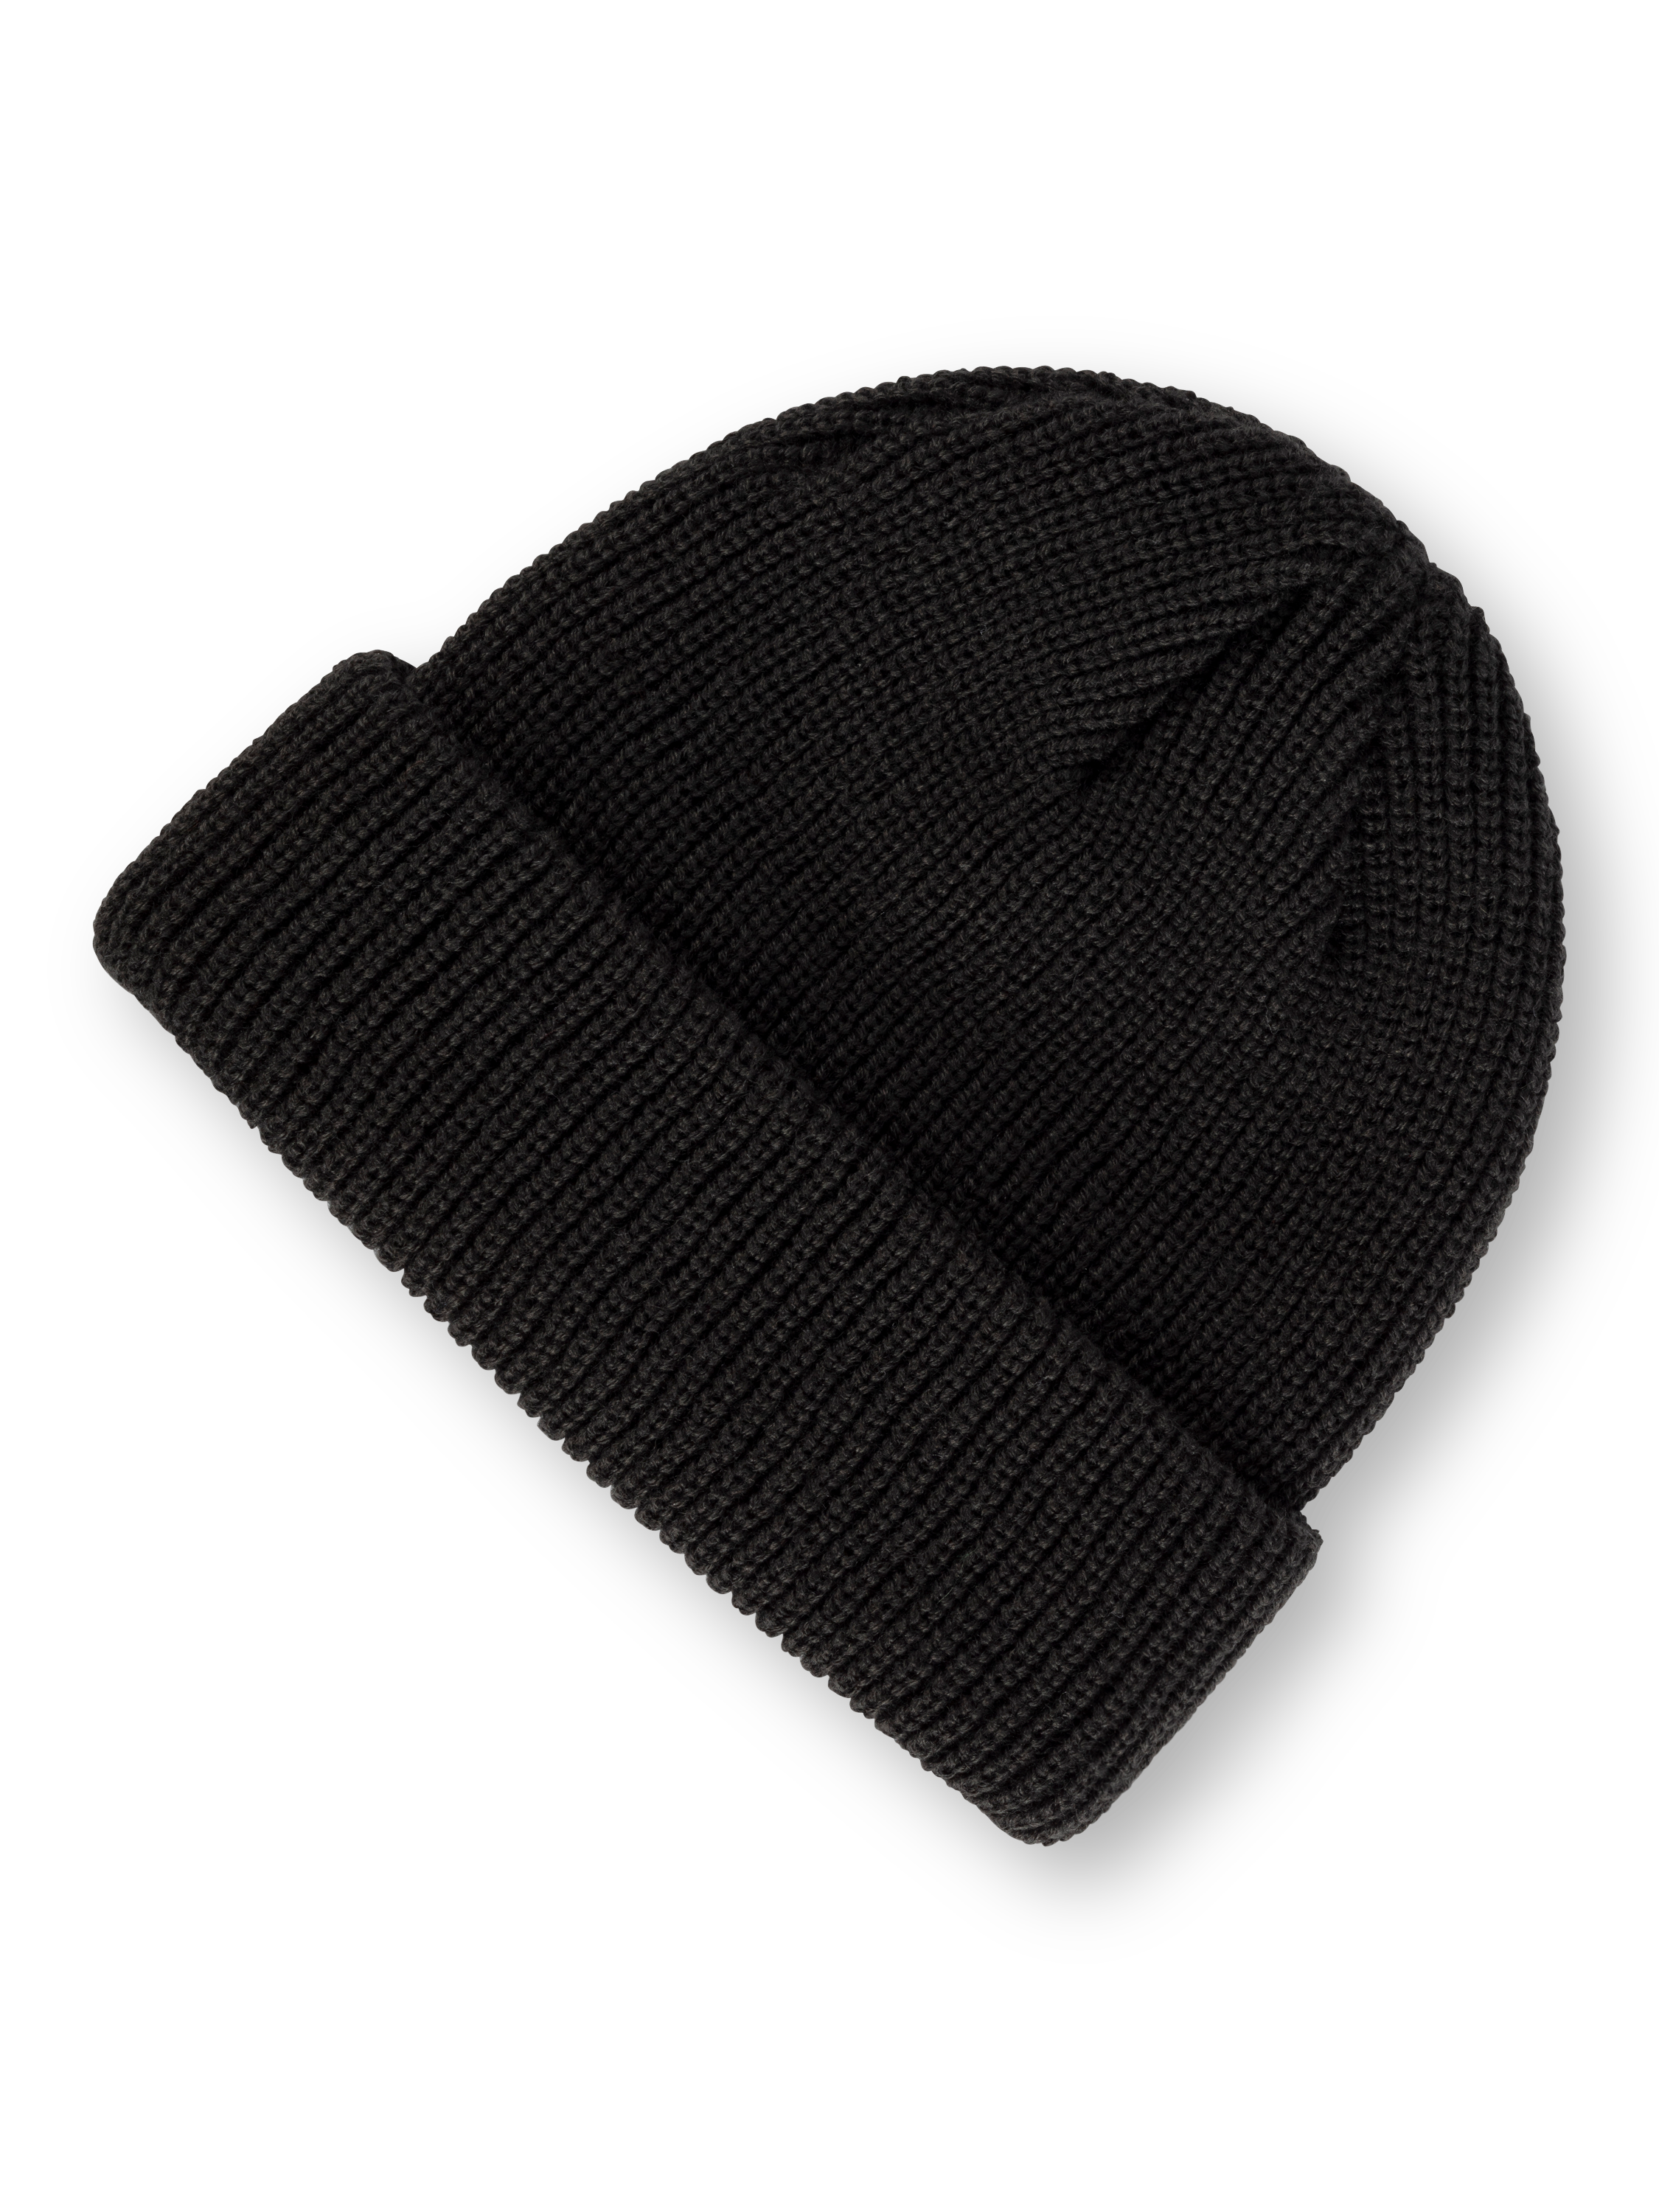 Red Bull Rampage Shop: Cliff Beanie